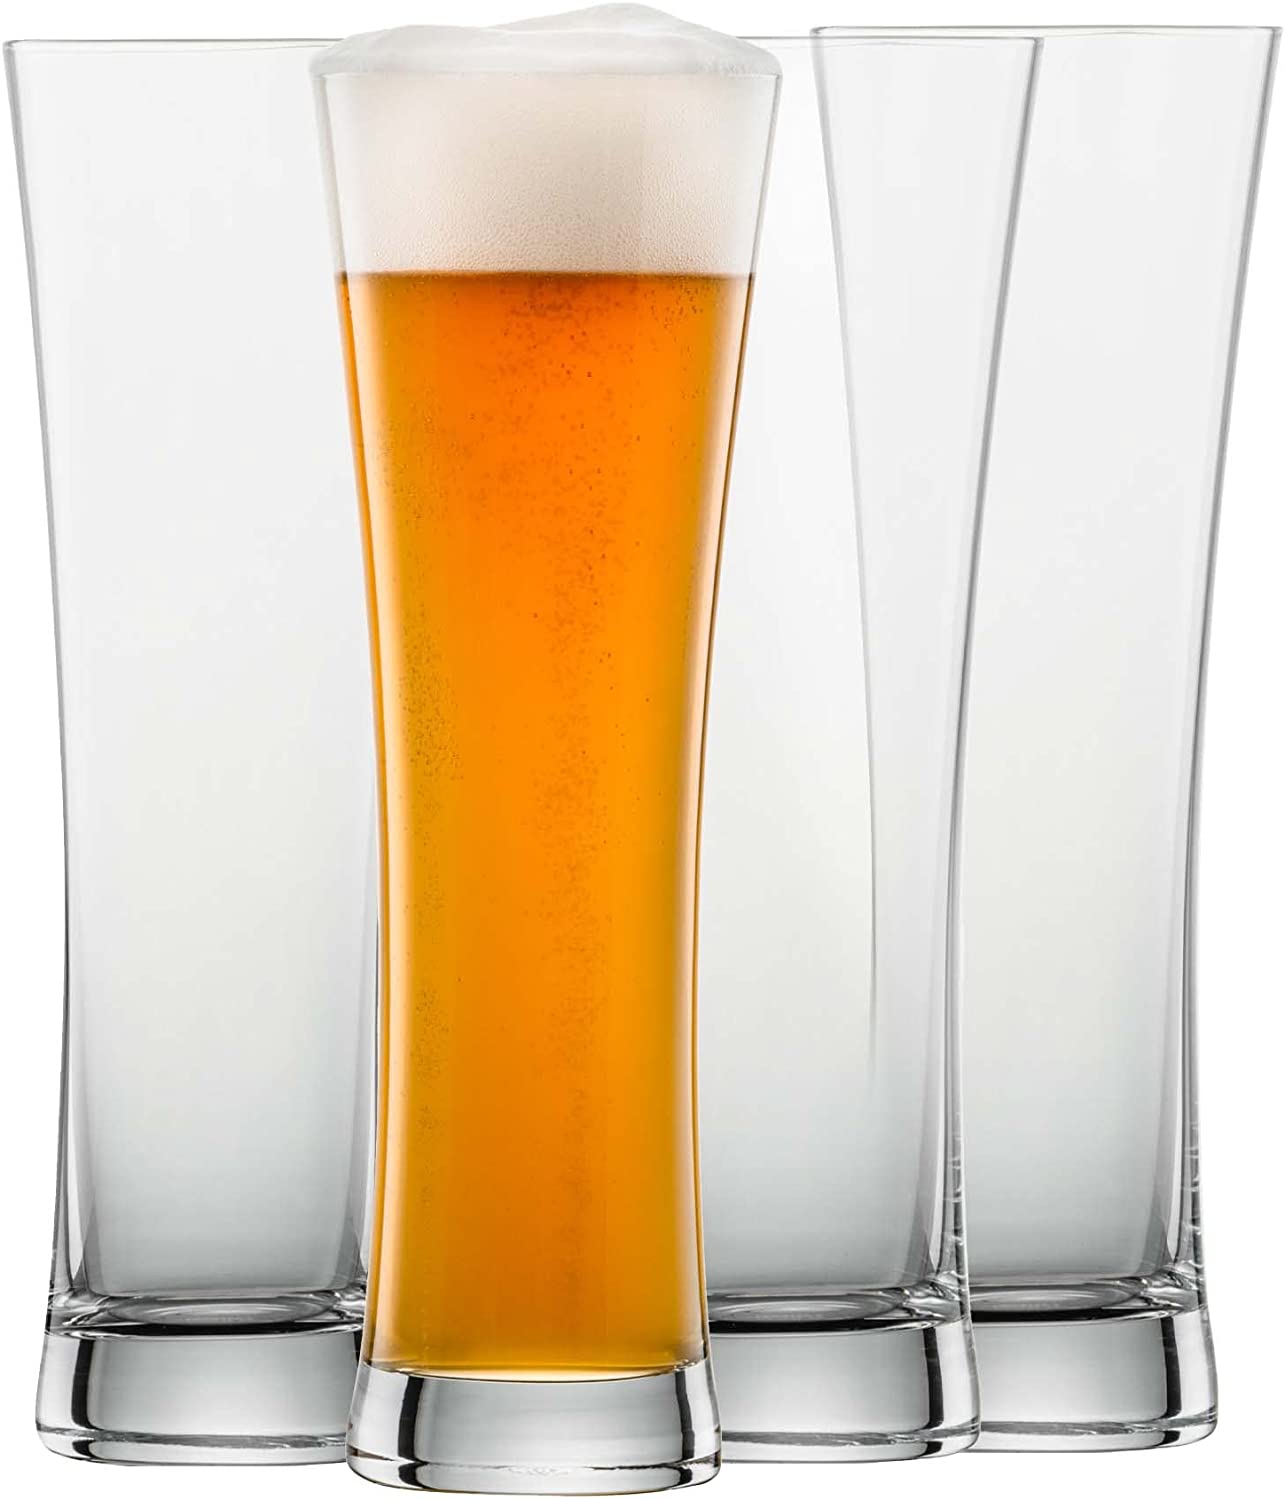 Schott Zwiesel Beer Basic 130007 Wheat Beer Glasses Set of 4 Glass in Crystal 0.5 L Dimensions 8.6 cm x 8.6 cm x 25.5 cm